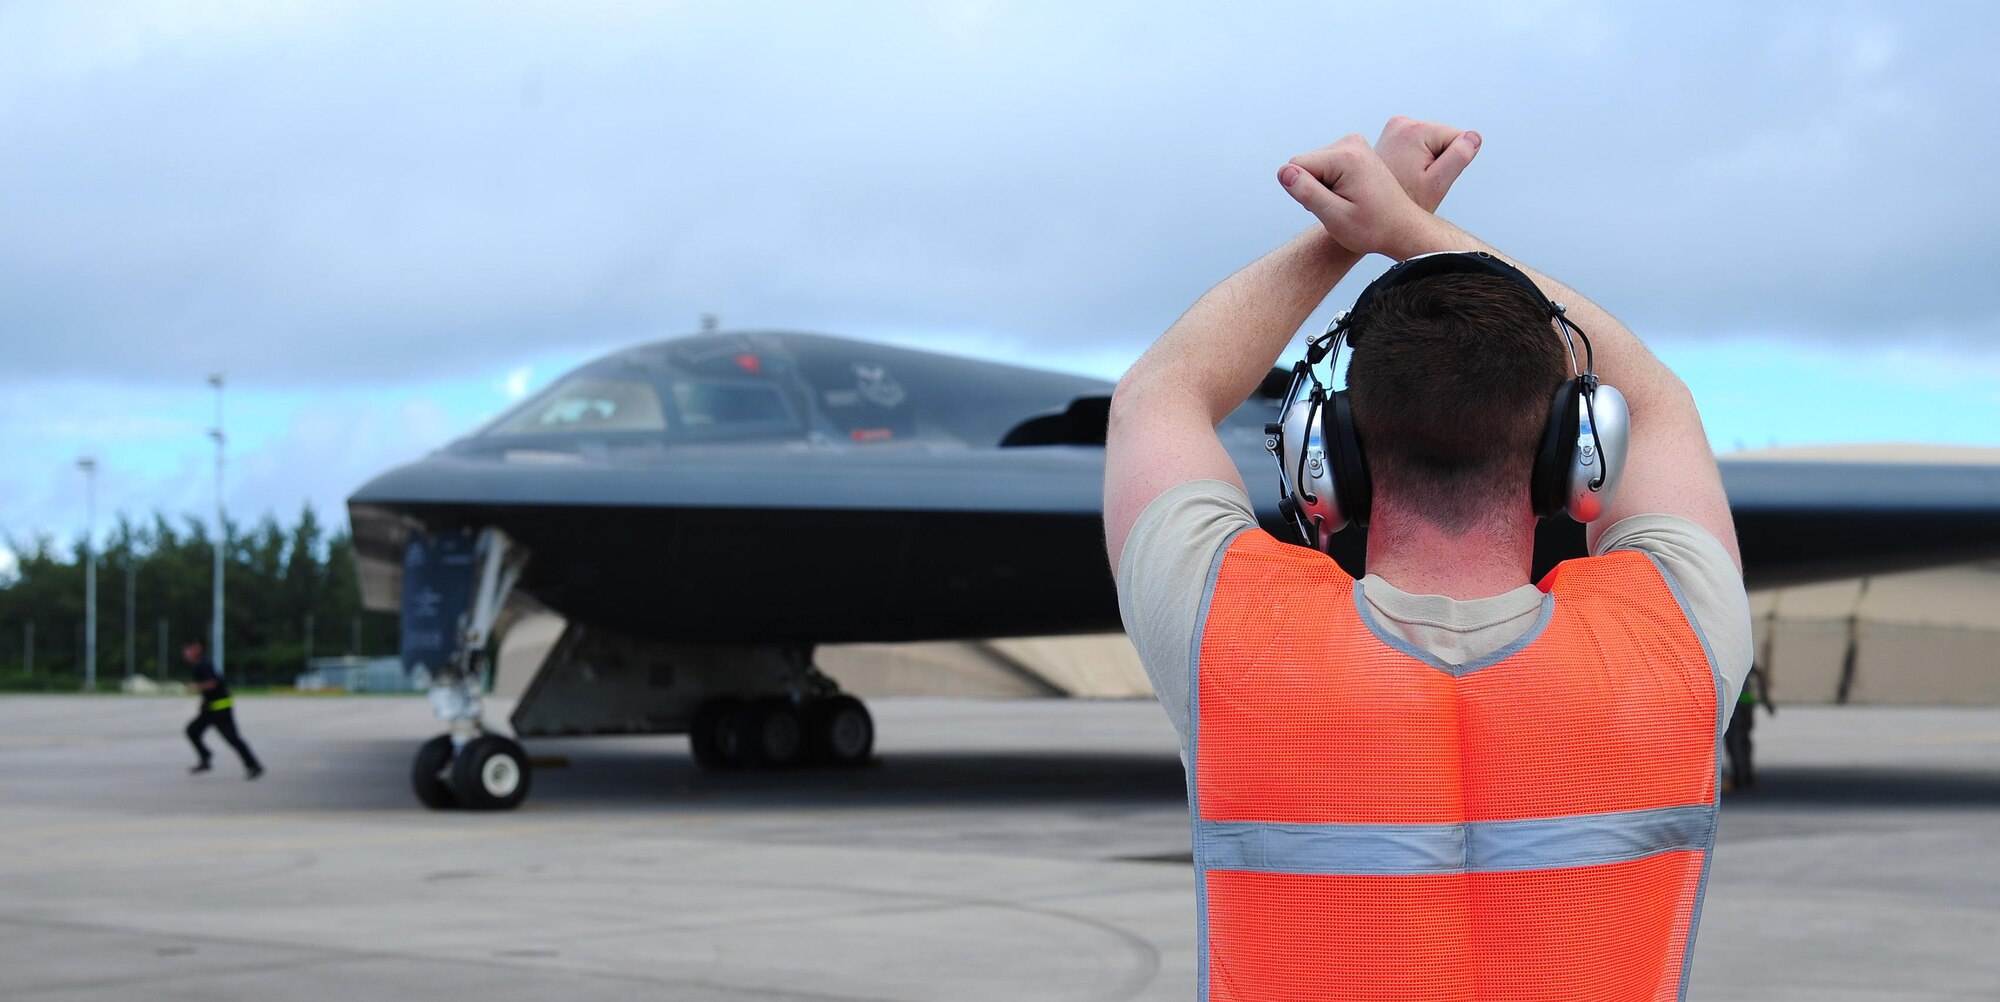 U.S. Air Force Senior Airman Adam Sweet, a crew chief from the 393rd Aircraft Maintenance Unit, prepares to marshal a B-2 Spirit while deployed at an undisclosed location in the U.S. Pacific Command area of operations March 10, 2016. Bomber crews routinely deploy to maintain a high state of readiness and crew proficiency while integrating capabilities with key regional partners. (U.S. Air Force photo by Senior Airman Joel Pfiester/Released)